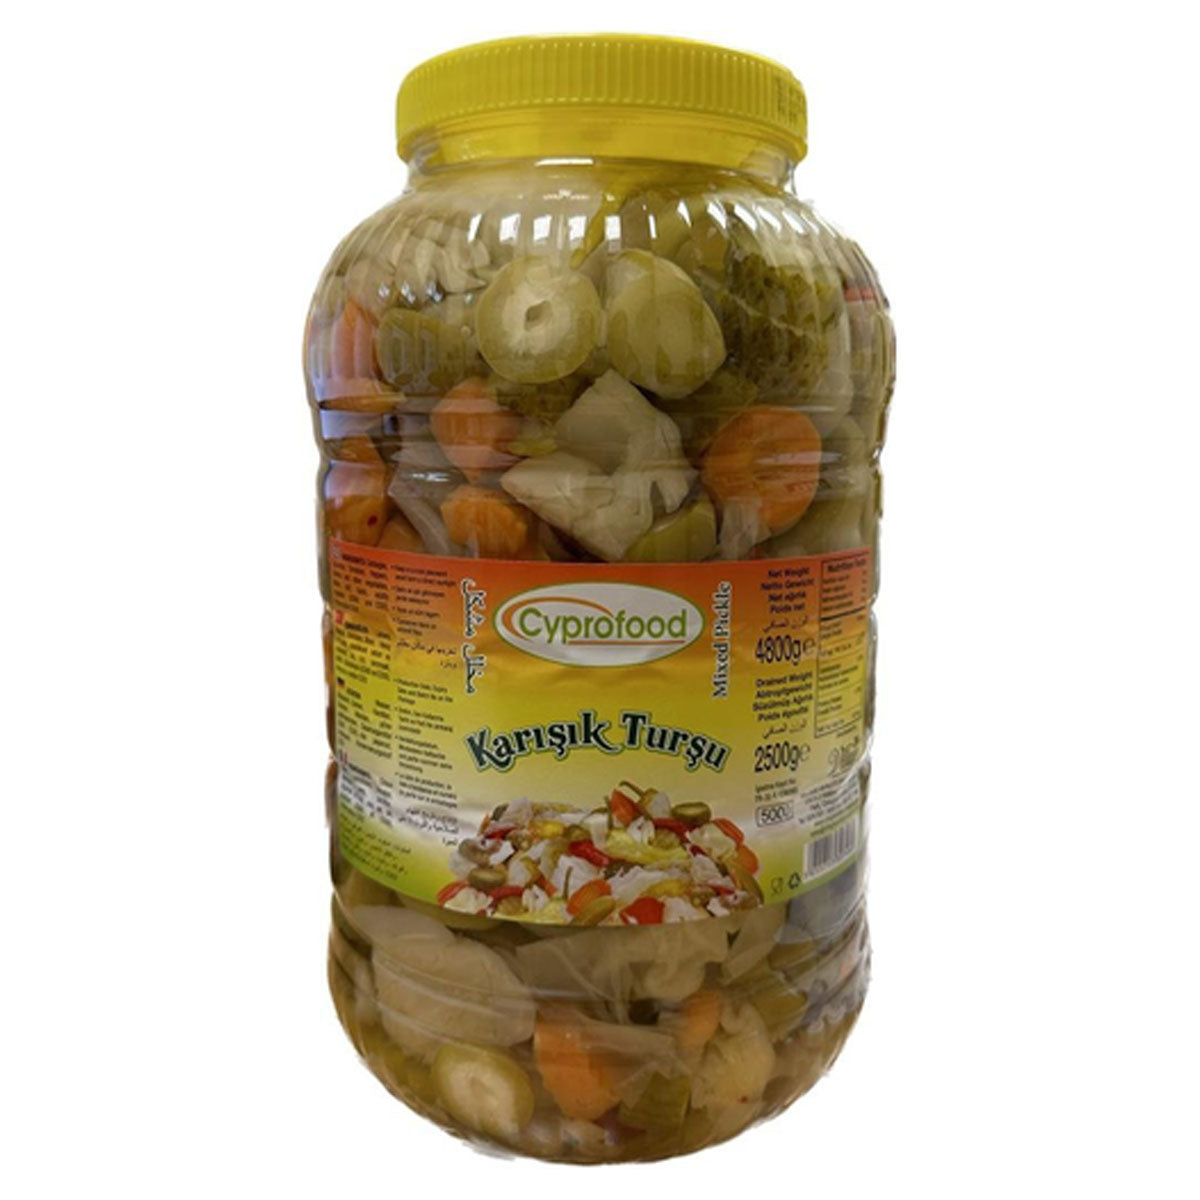 A CyproFood - Mixed Pickles - 4.8Kg jar of pickled vegetables on a white background.